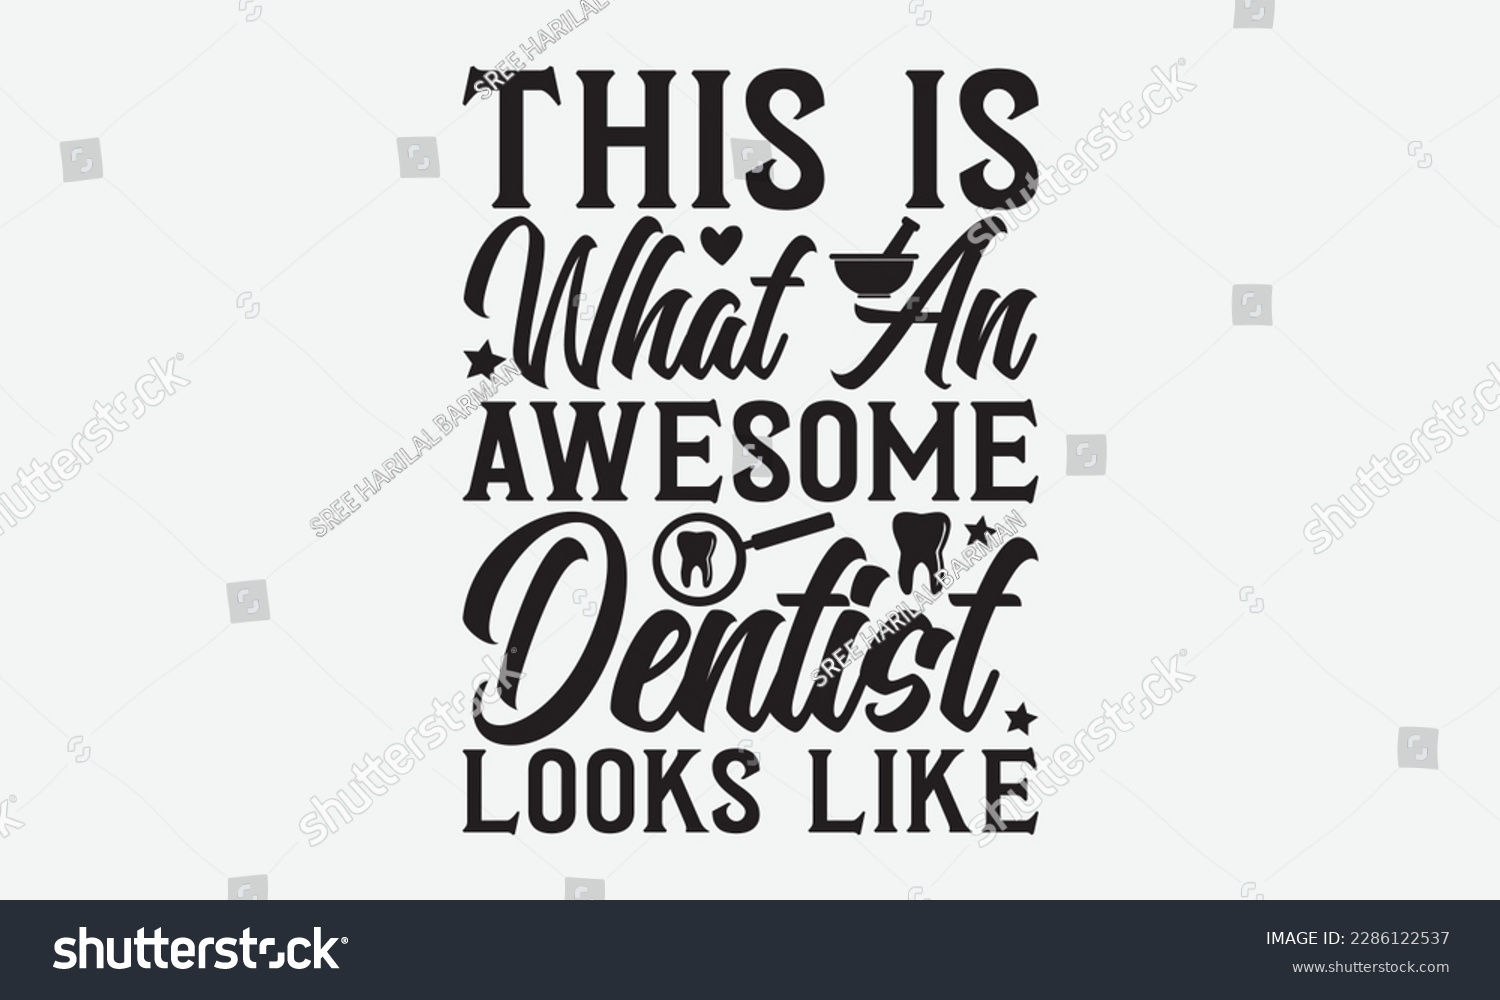 SVG of This Is What An Awesome Dentist Looks Like - Dentist T-shirt Design, Conceptual handwritten phrase craft SVG hand-lettered, Handmade calligraphy vector illustration, template, greeting cards, mugs,  svg